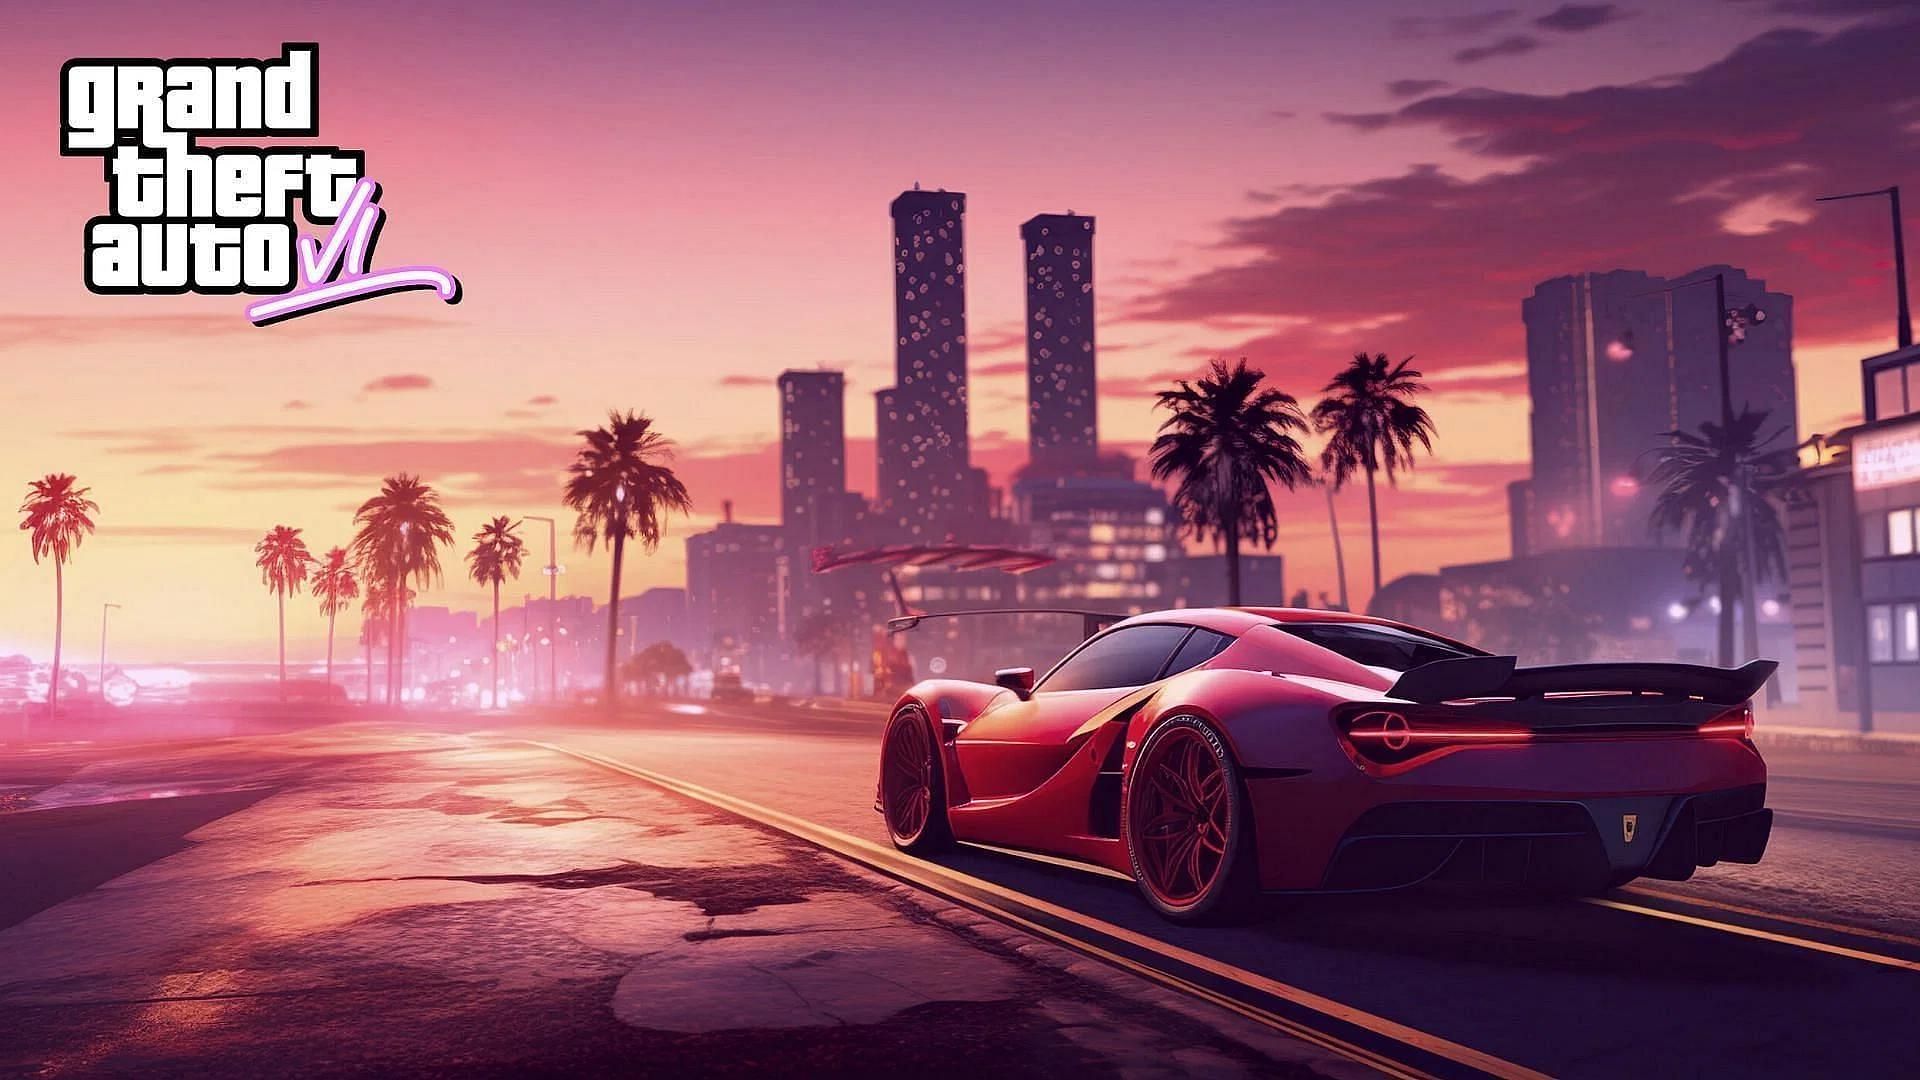 GTA 6 prices: How much is the game expected to cost?